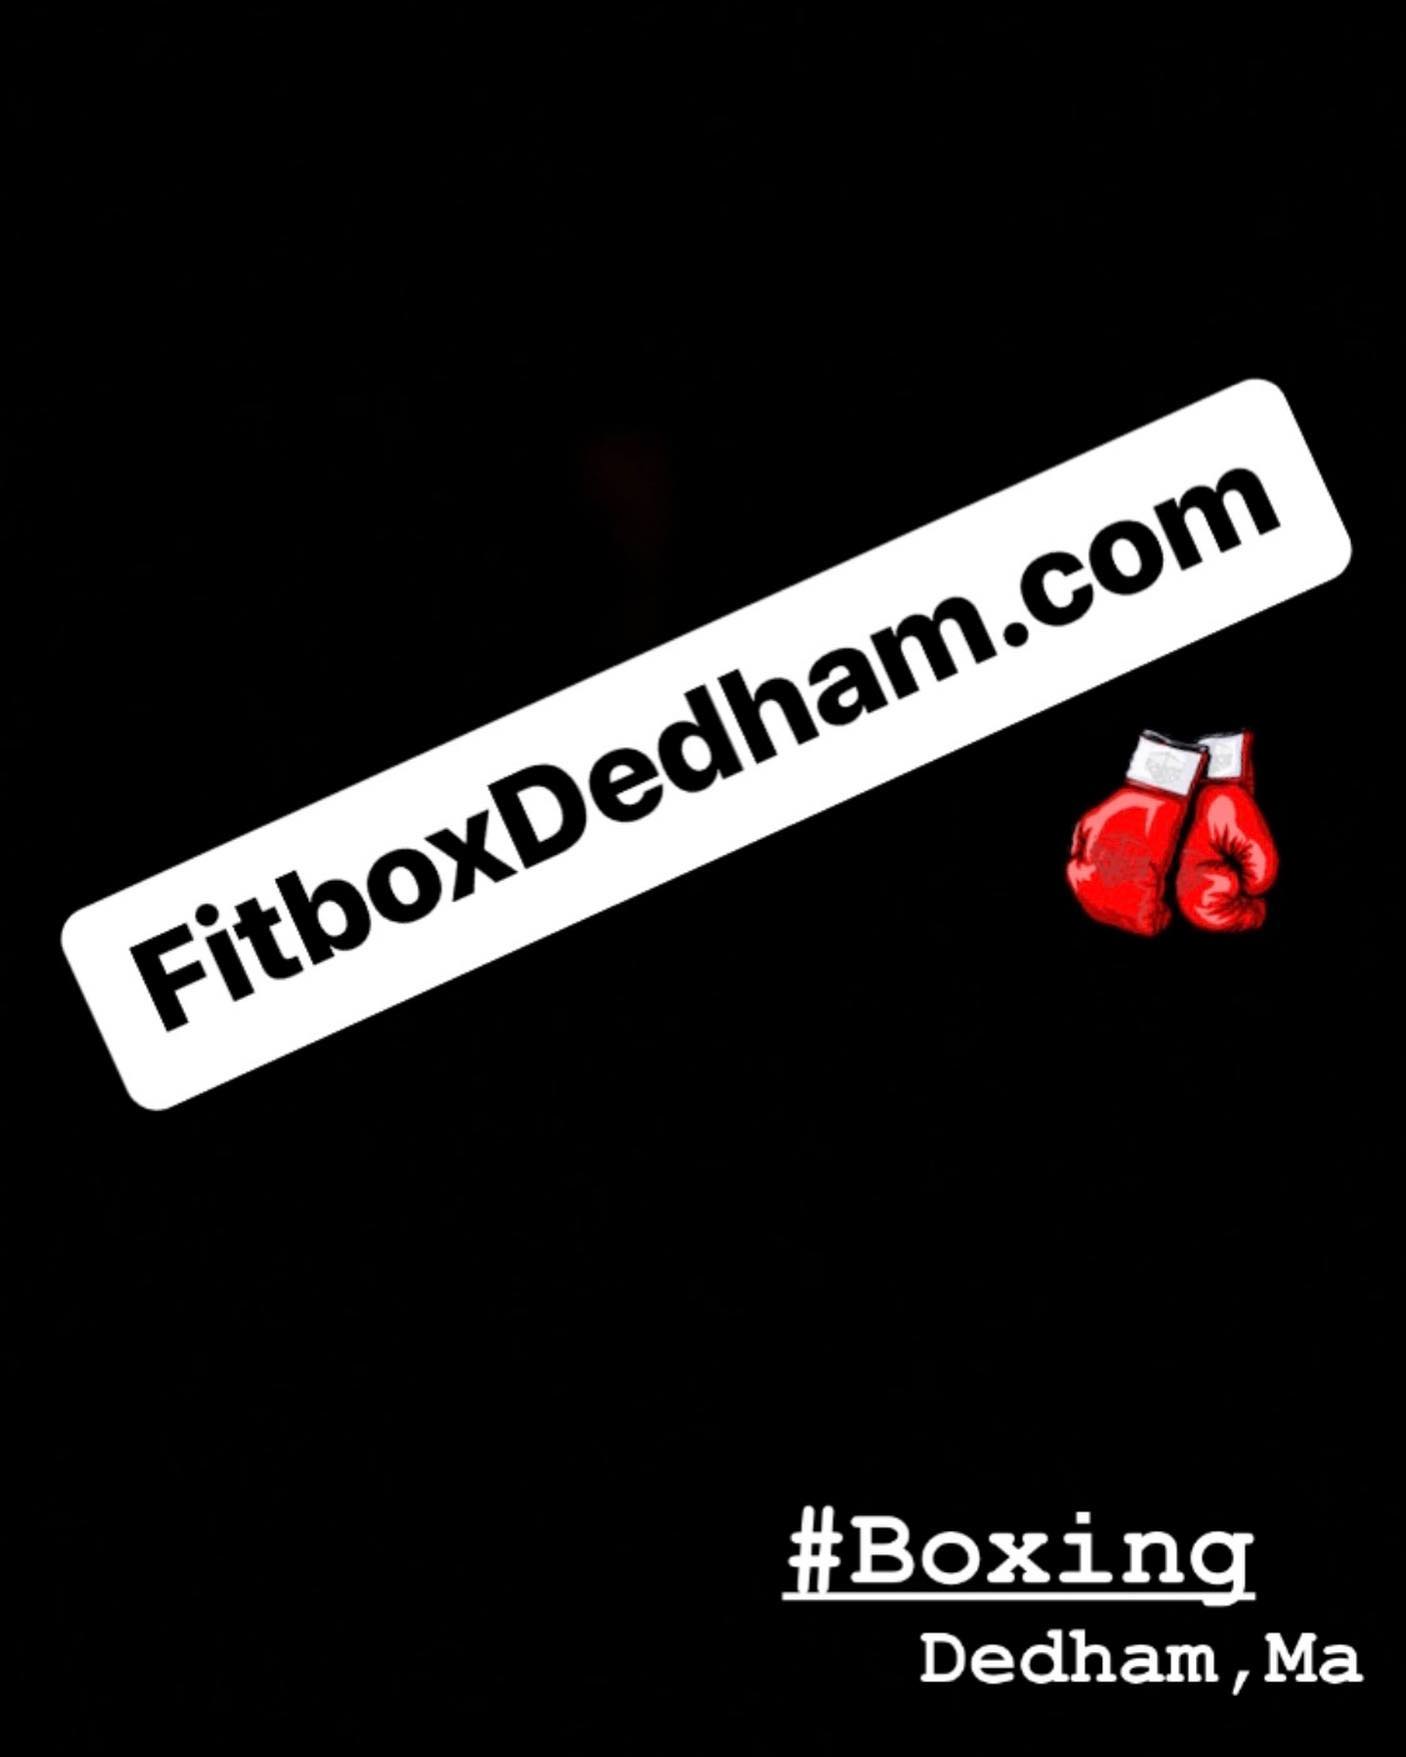 Train like the best with the best www.fitboxDedham.com 
@tommymcinerney